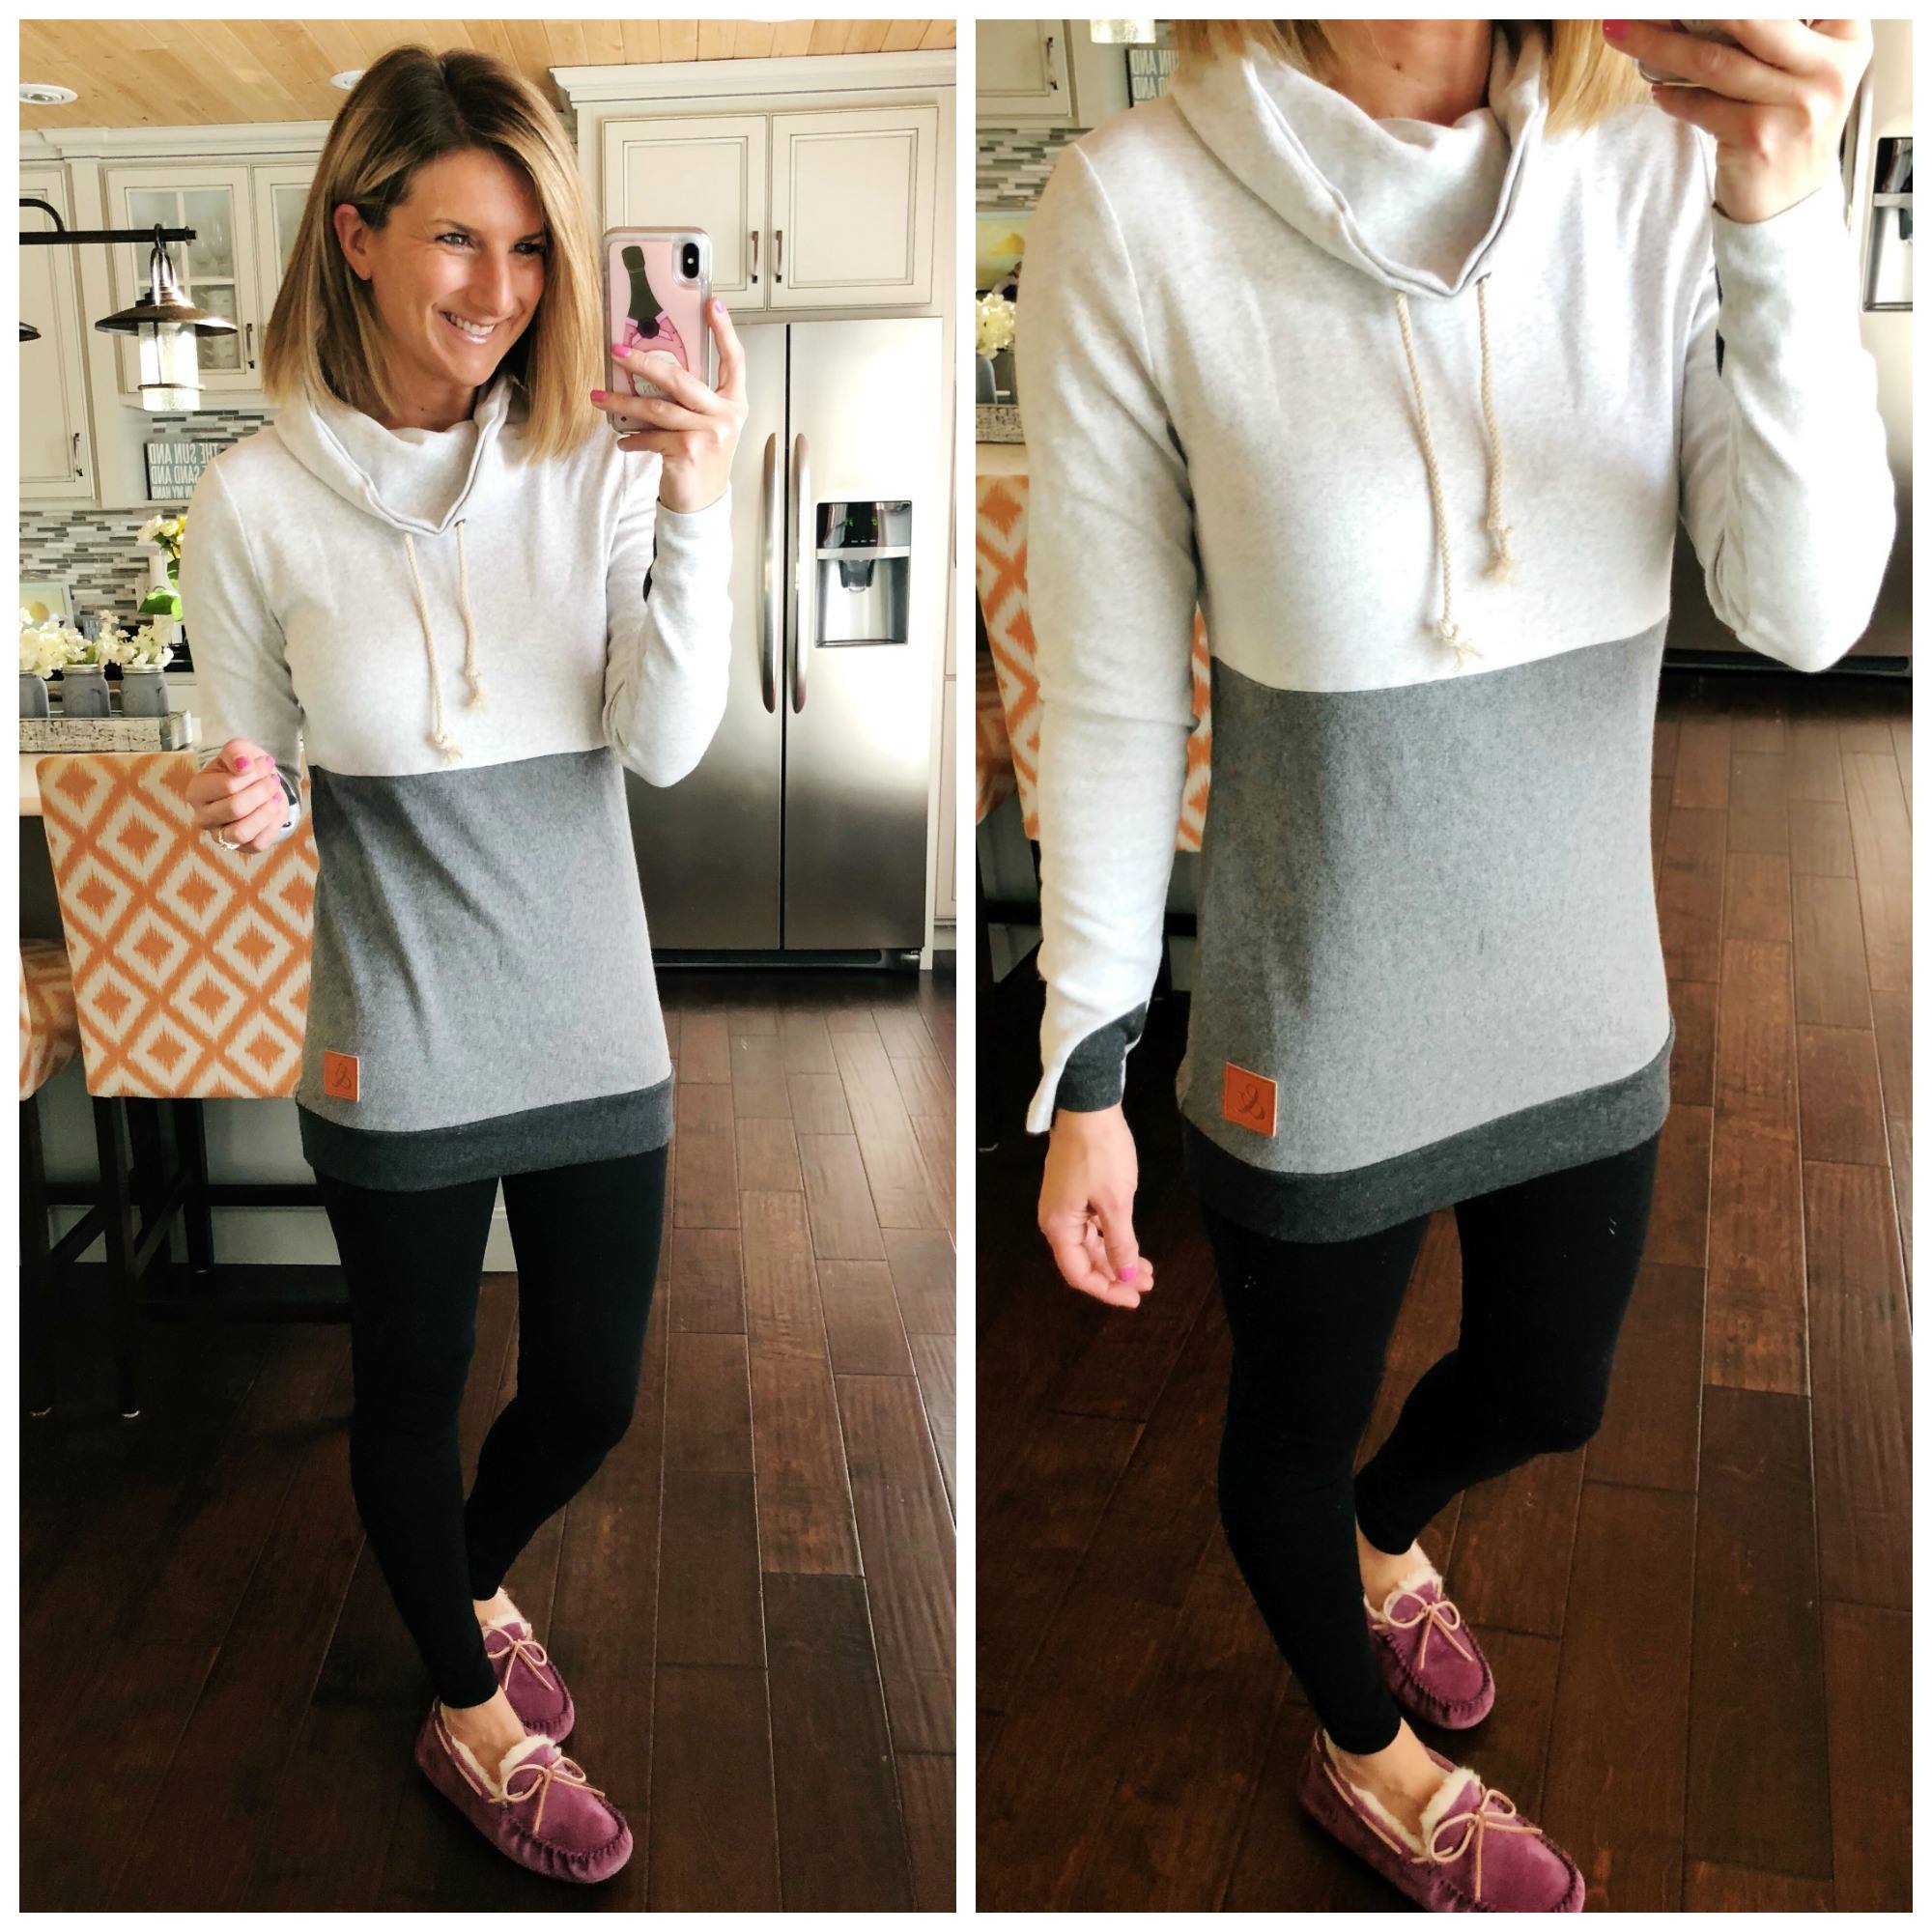 Athleisure Outfit // Cowlneck Sweatshirt + Black Leggings + Ugg Slippers // Casual Spring Outfit